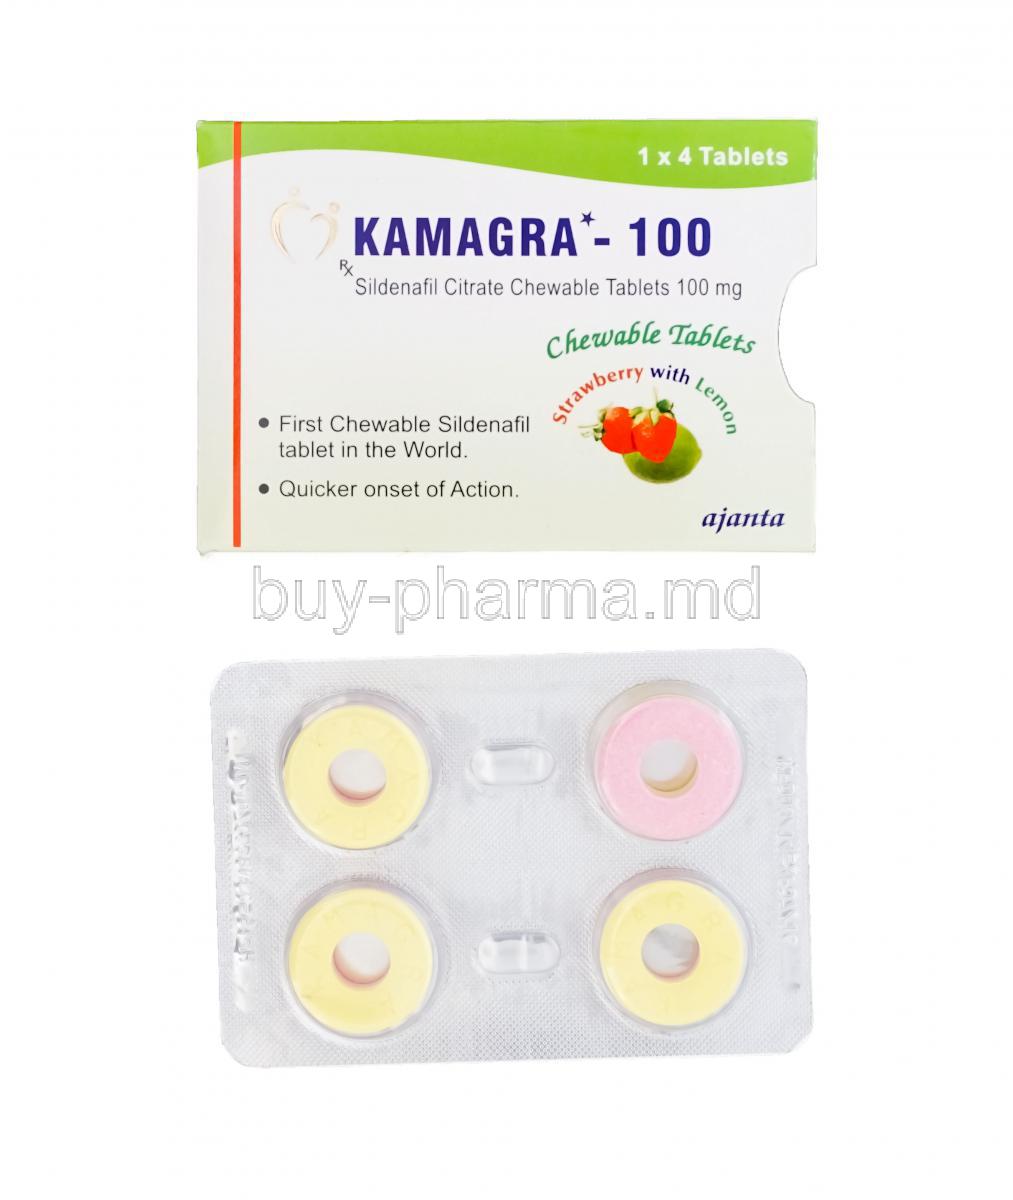 Kamagra - 100 CT, Sildenafil Citrate Chewable Strawberry with Lemon 100mg